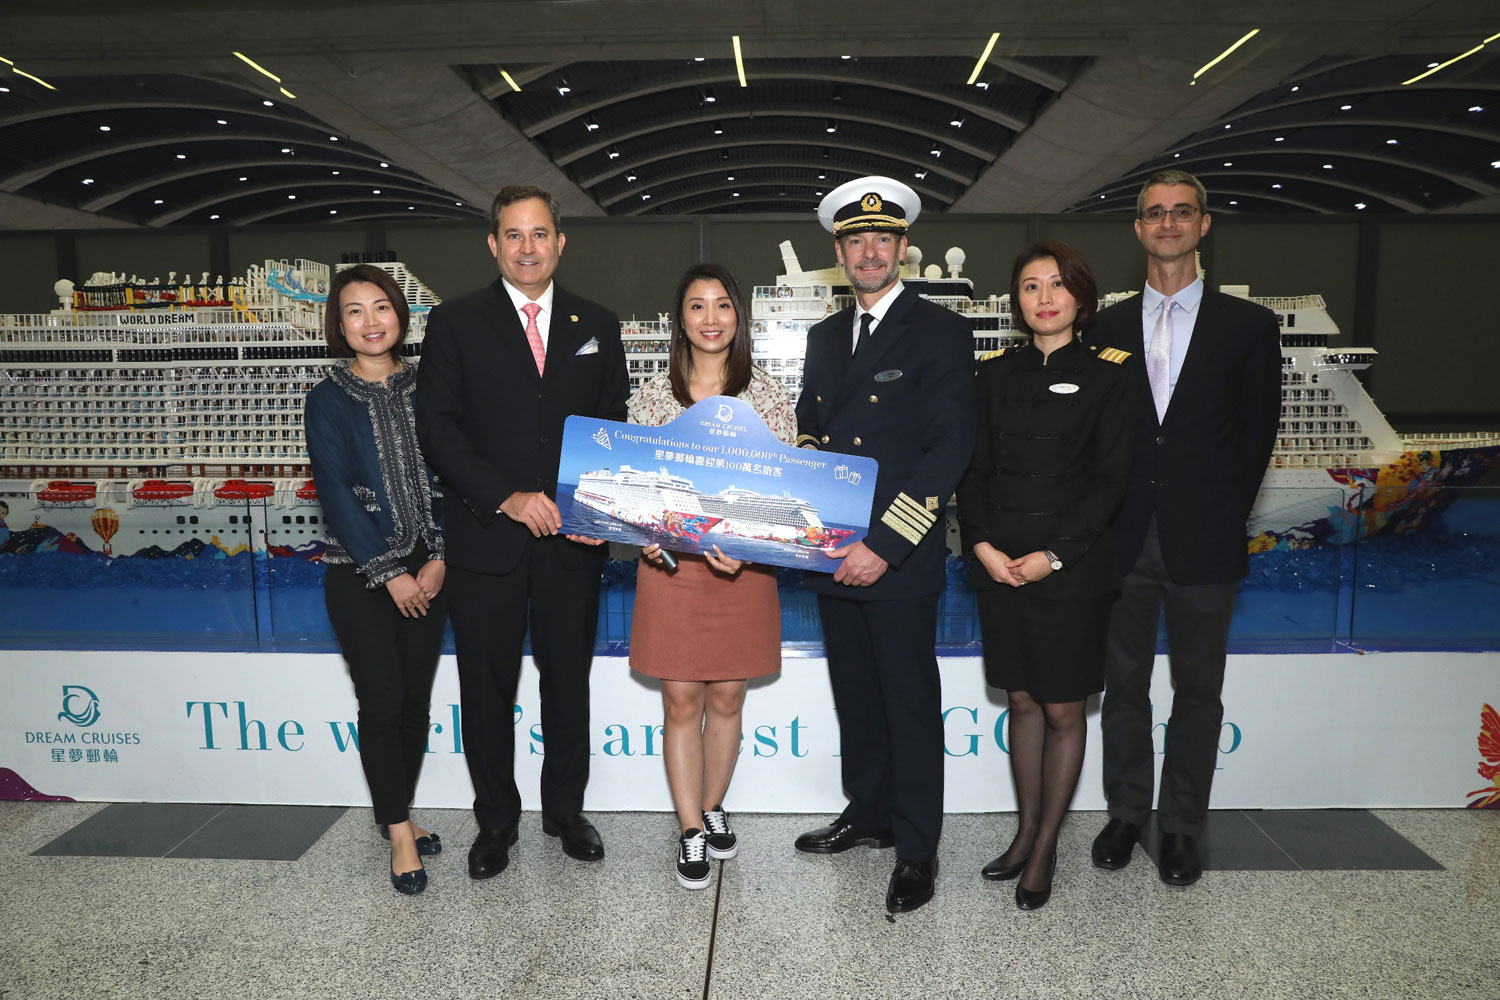 From left to right: Ms Christine Li, Senior Vice President, Head of Marketing & Communications, Genting Cruise Lines; Mr Thatcher Brown, President of Dream Cruises; Ms Mimi Lo, 1 millionth passenger of Dream Cruises; Captain Robert Bodin of World Dream; Ms Ann Zhang, Hotel Director of World Dream; Jeff Bent, Managing Director of Worldwide Cruise Terminals.